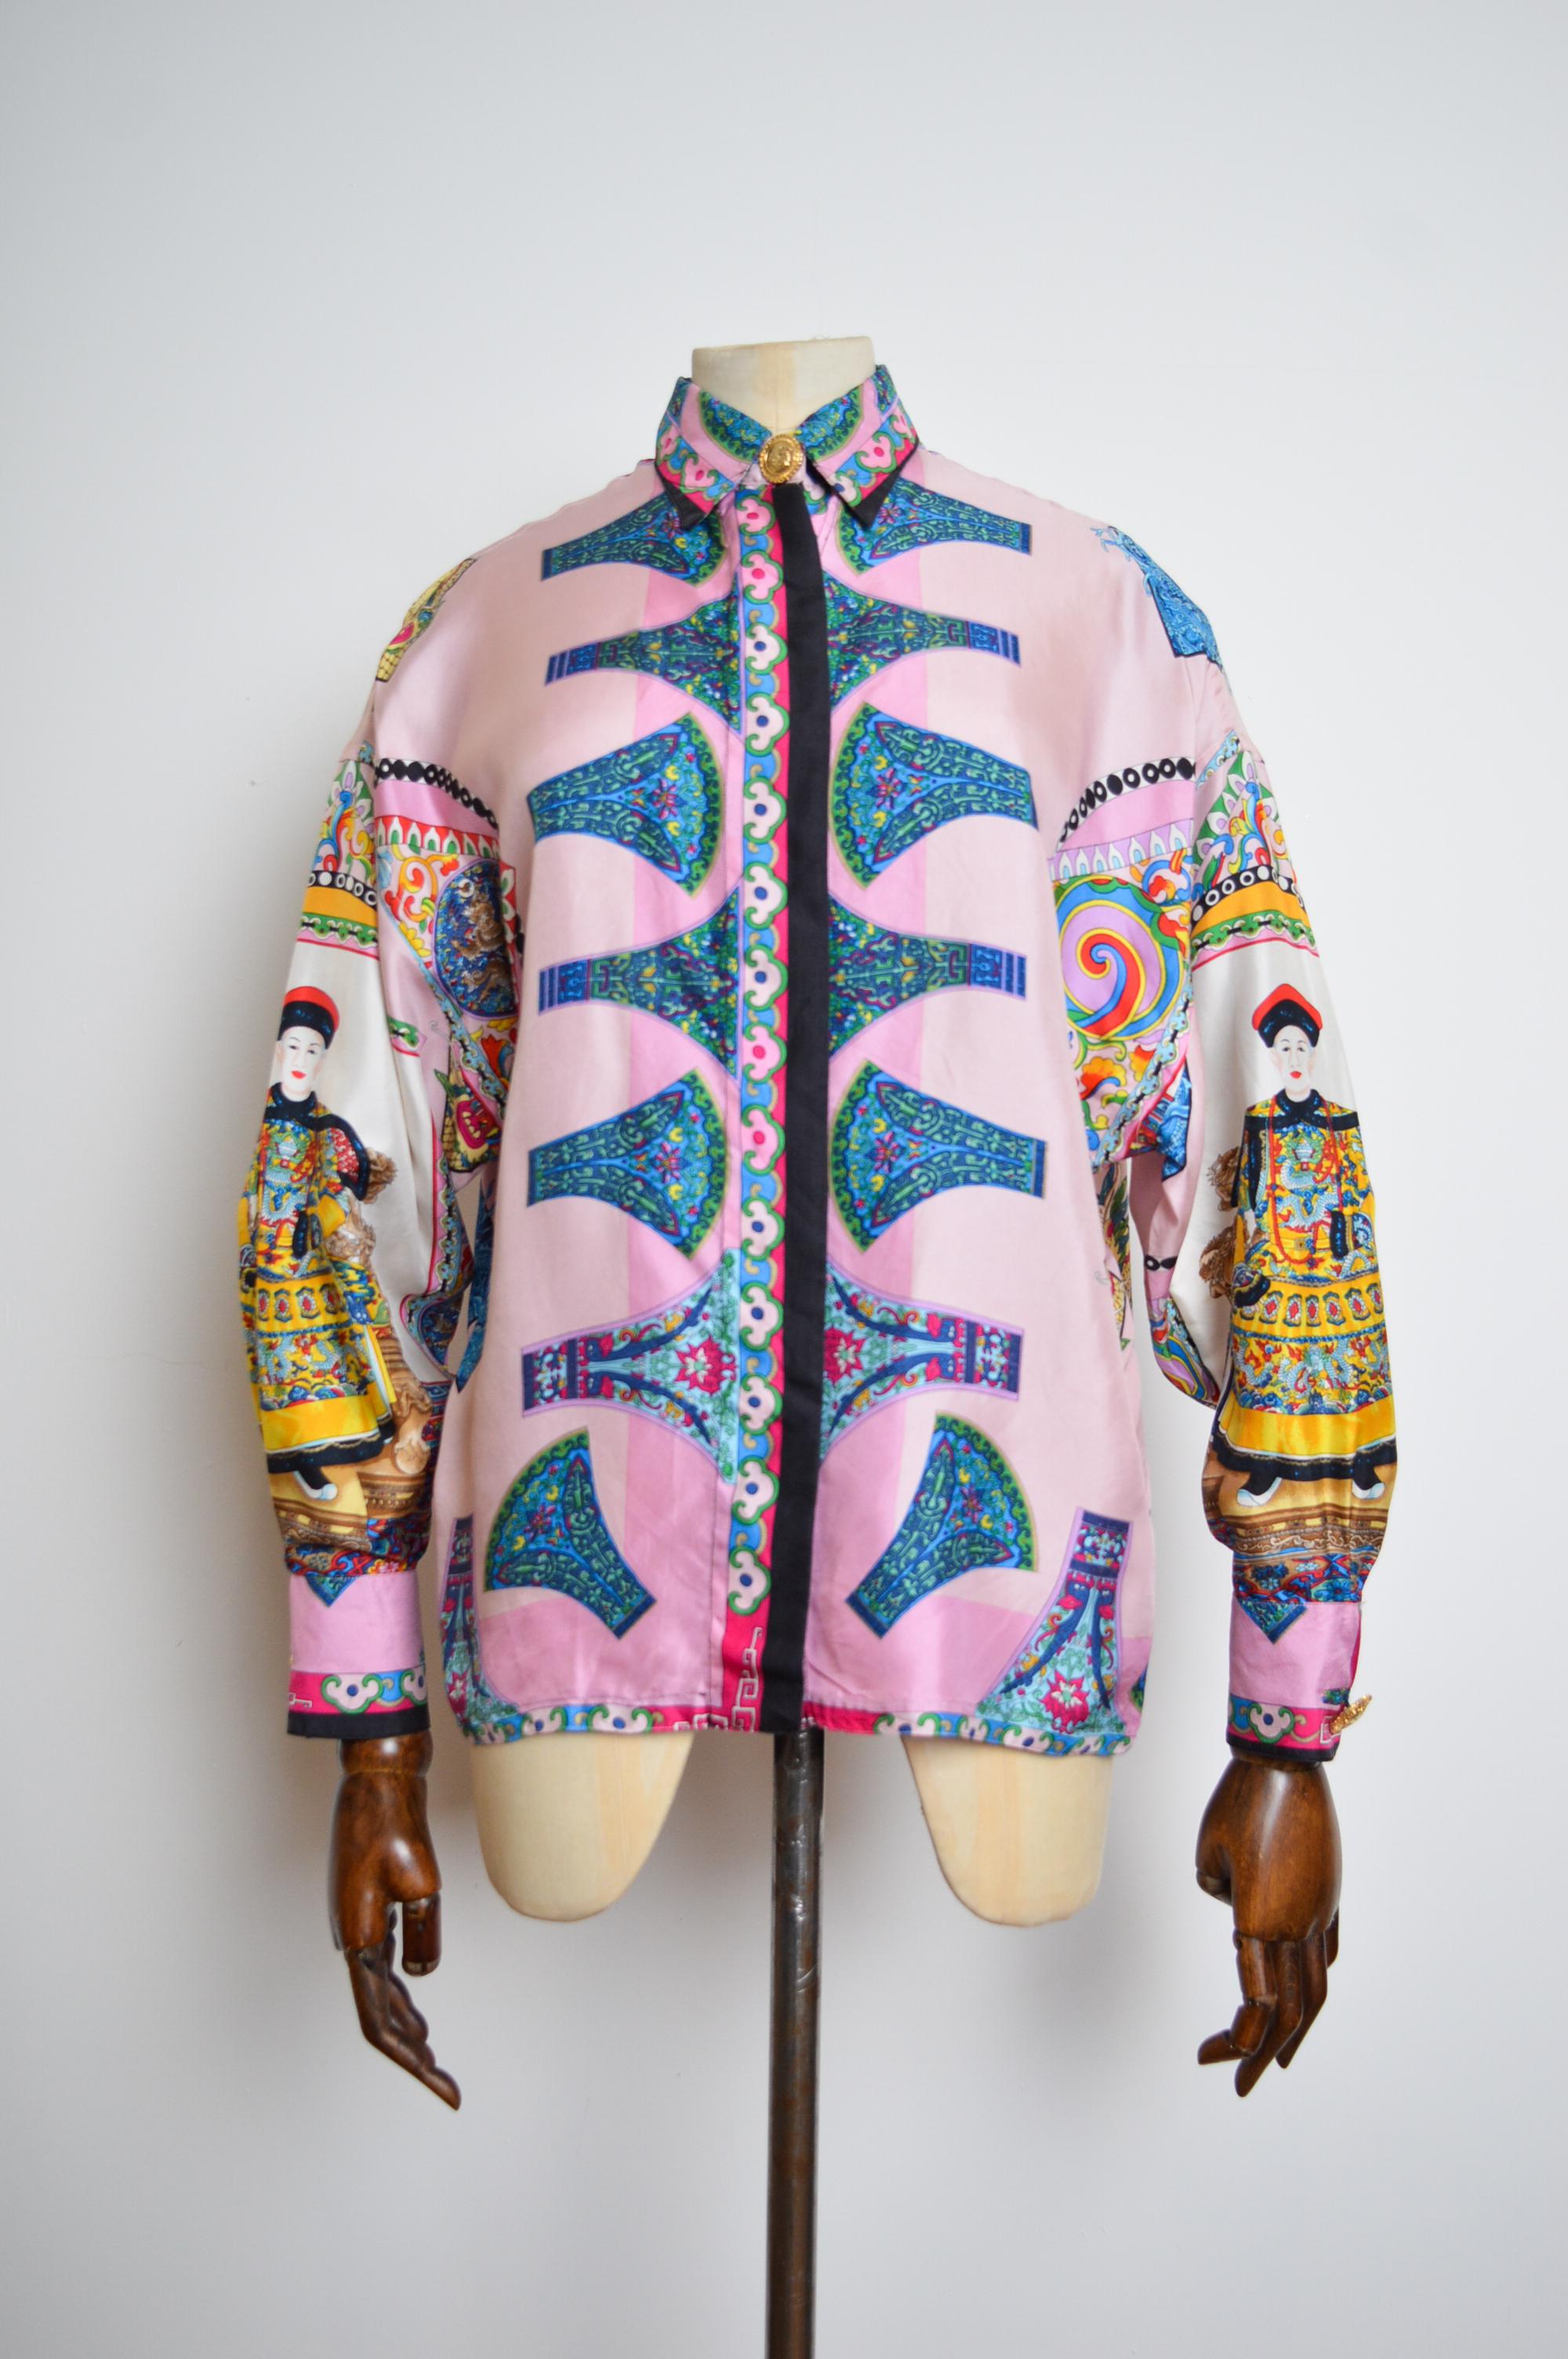 Women's or Men's Gianni Versace 1993 Spring Runway Atelier Pure Silk patterned Colourful Shirt For Sale